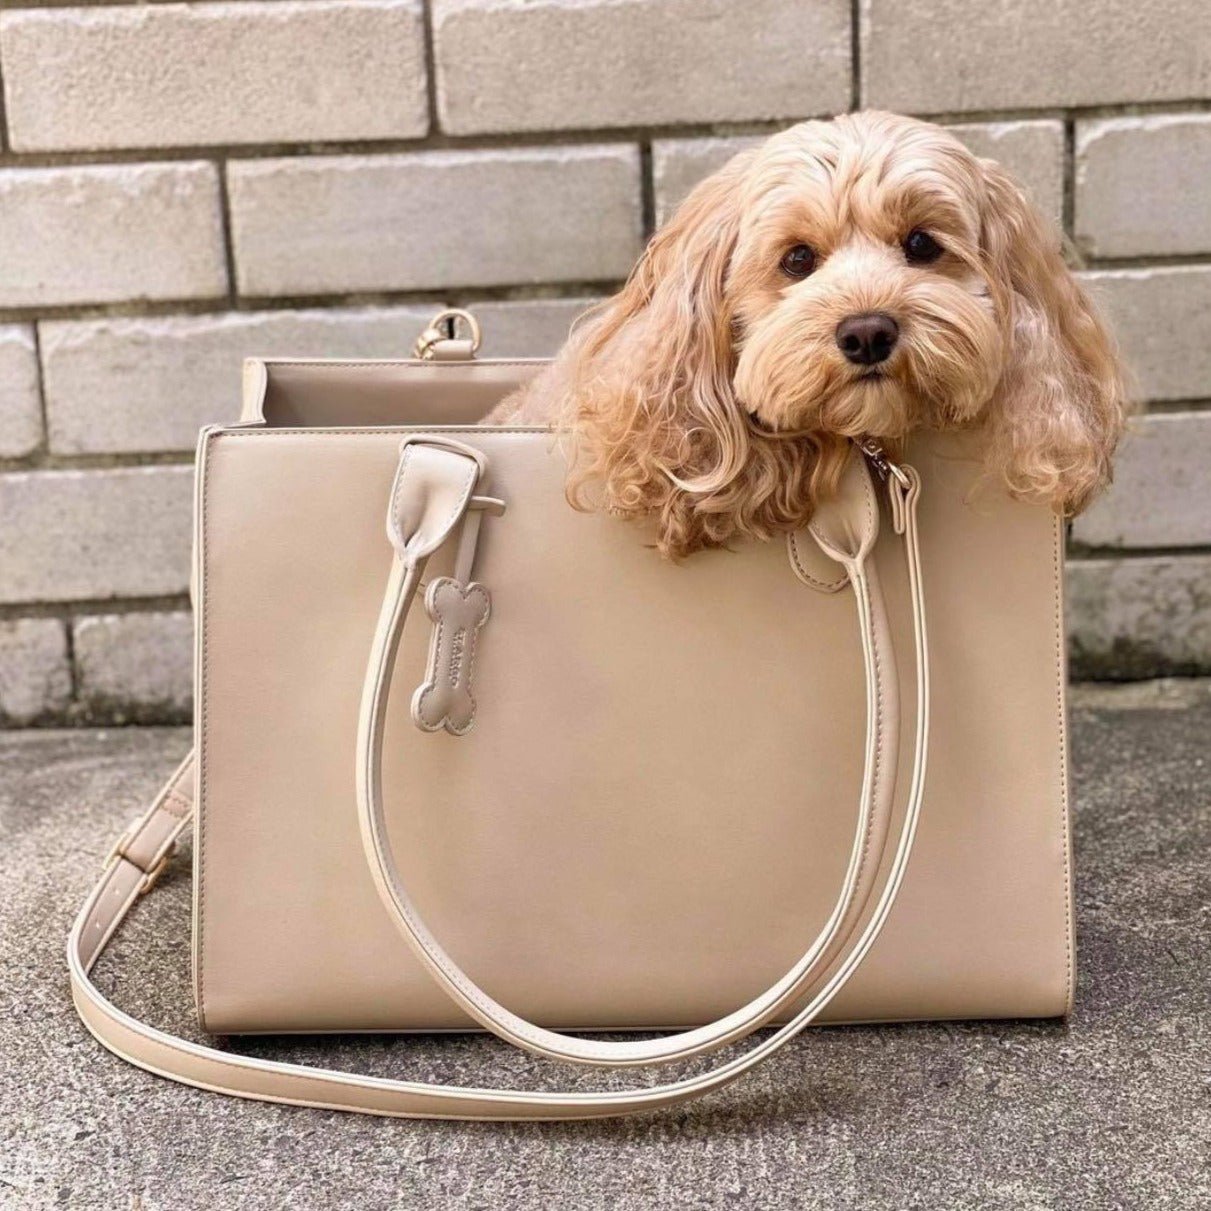 Beige LOLA dog carrier in vegan leather. With a cavapoo